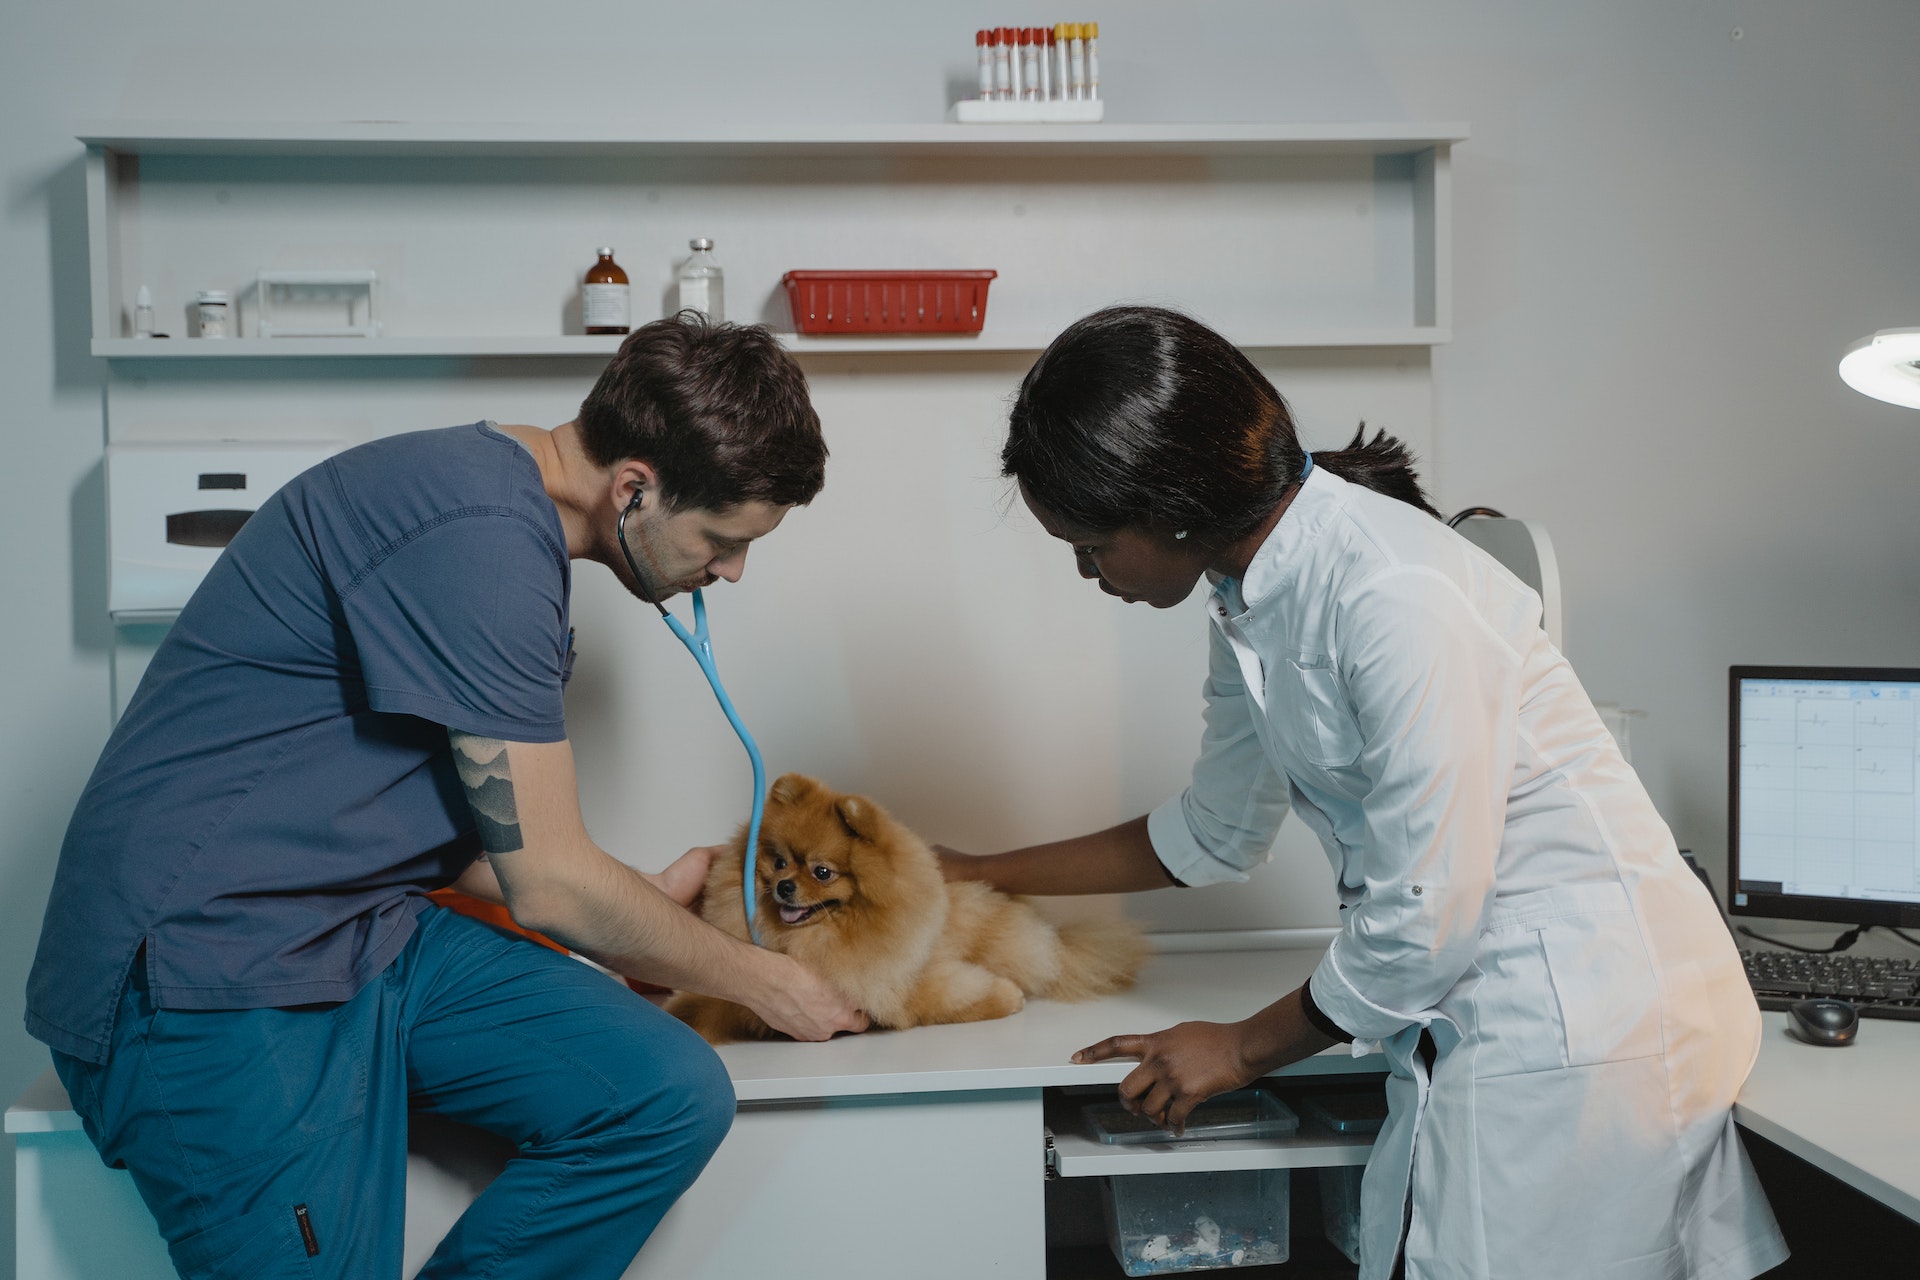 Vet providing a check up. Image by Tima Miroshnichenko from Pexels.